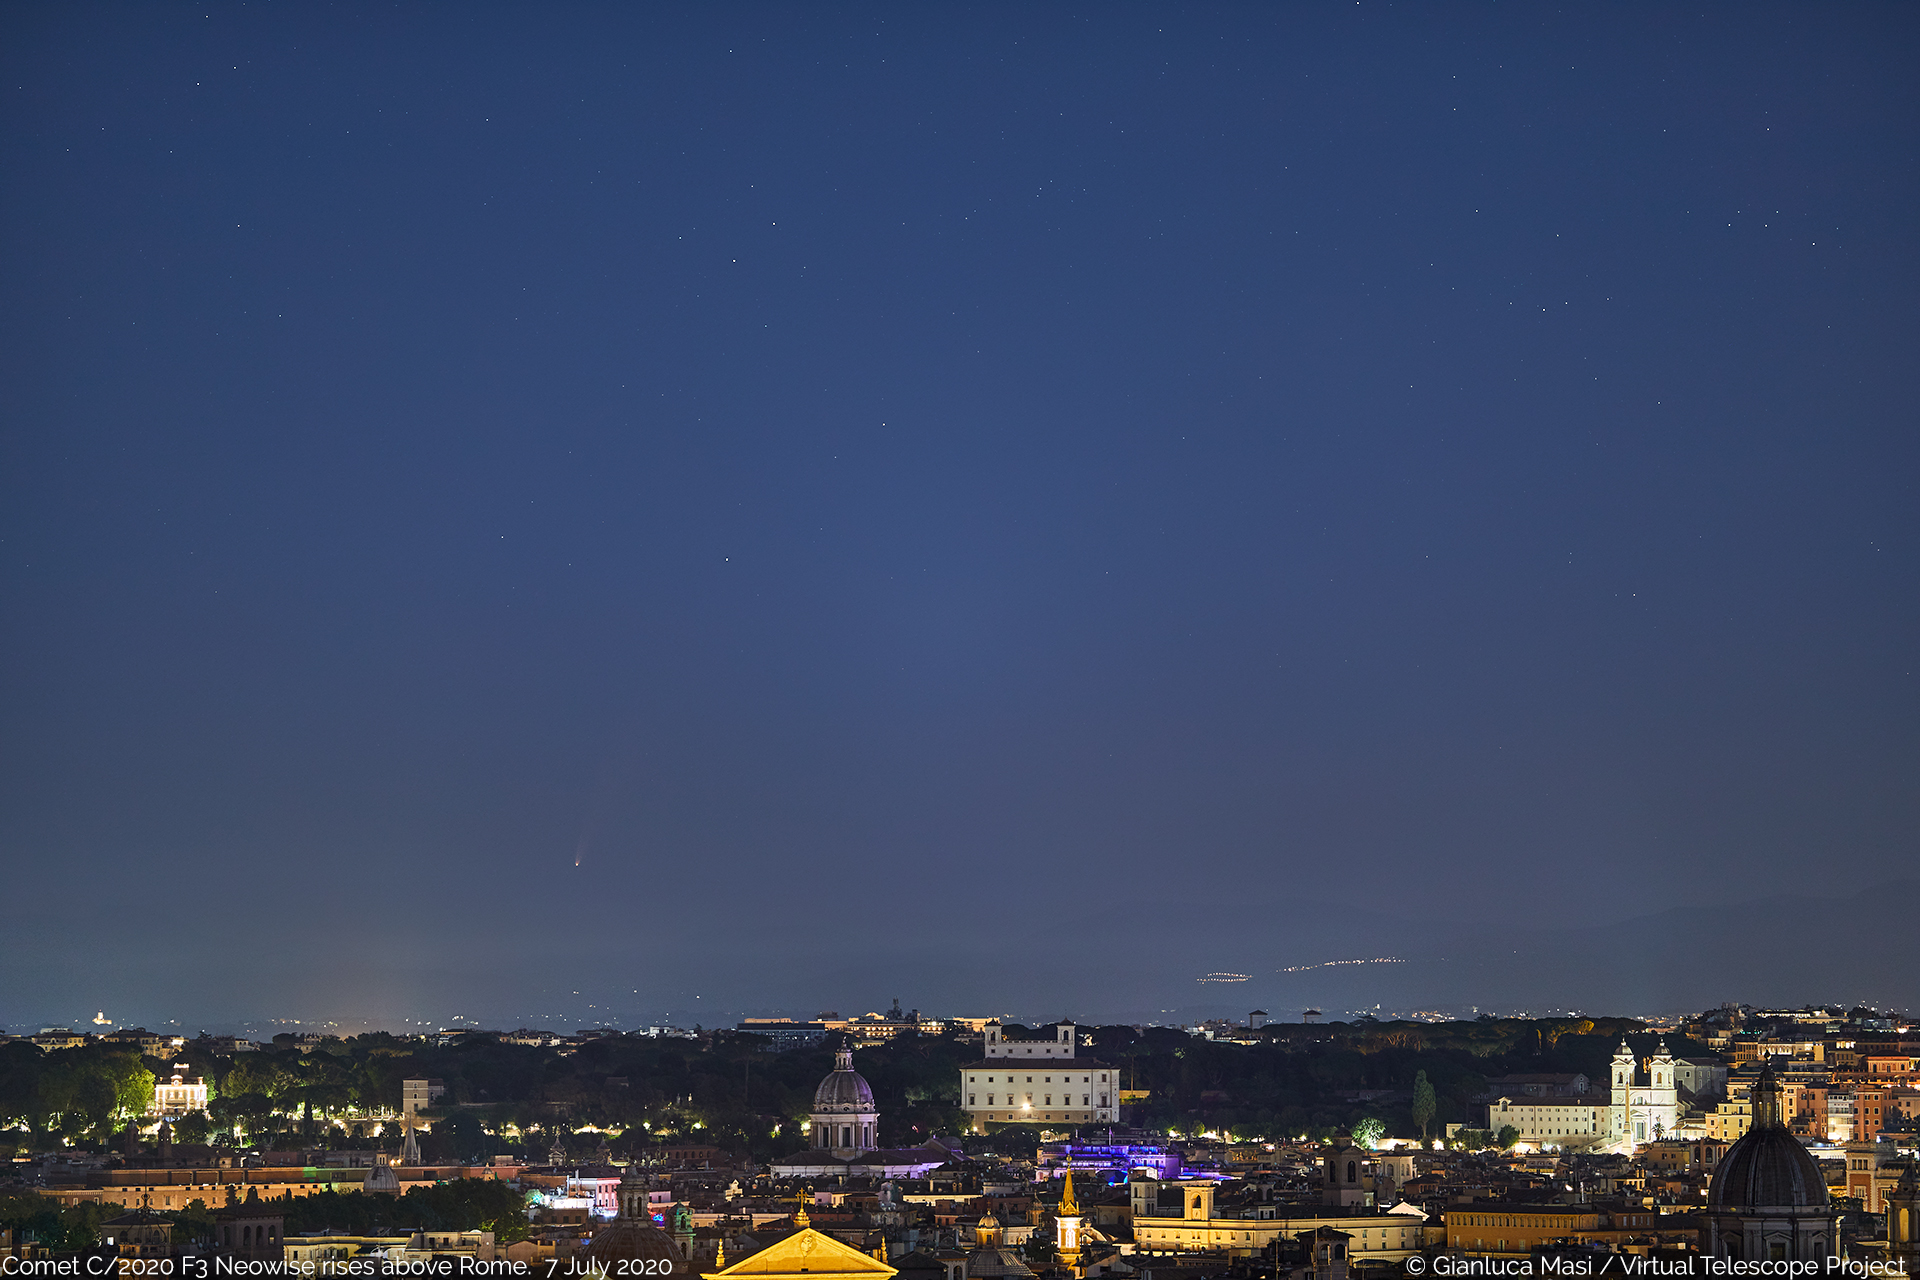 Comet C/2020 F3 Neowise rises above Rome - 7 July 2020.